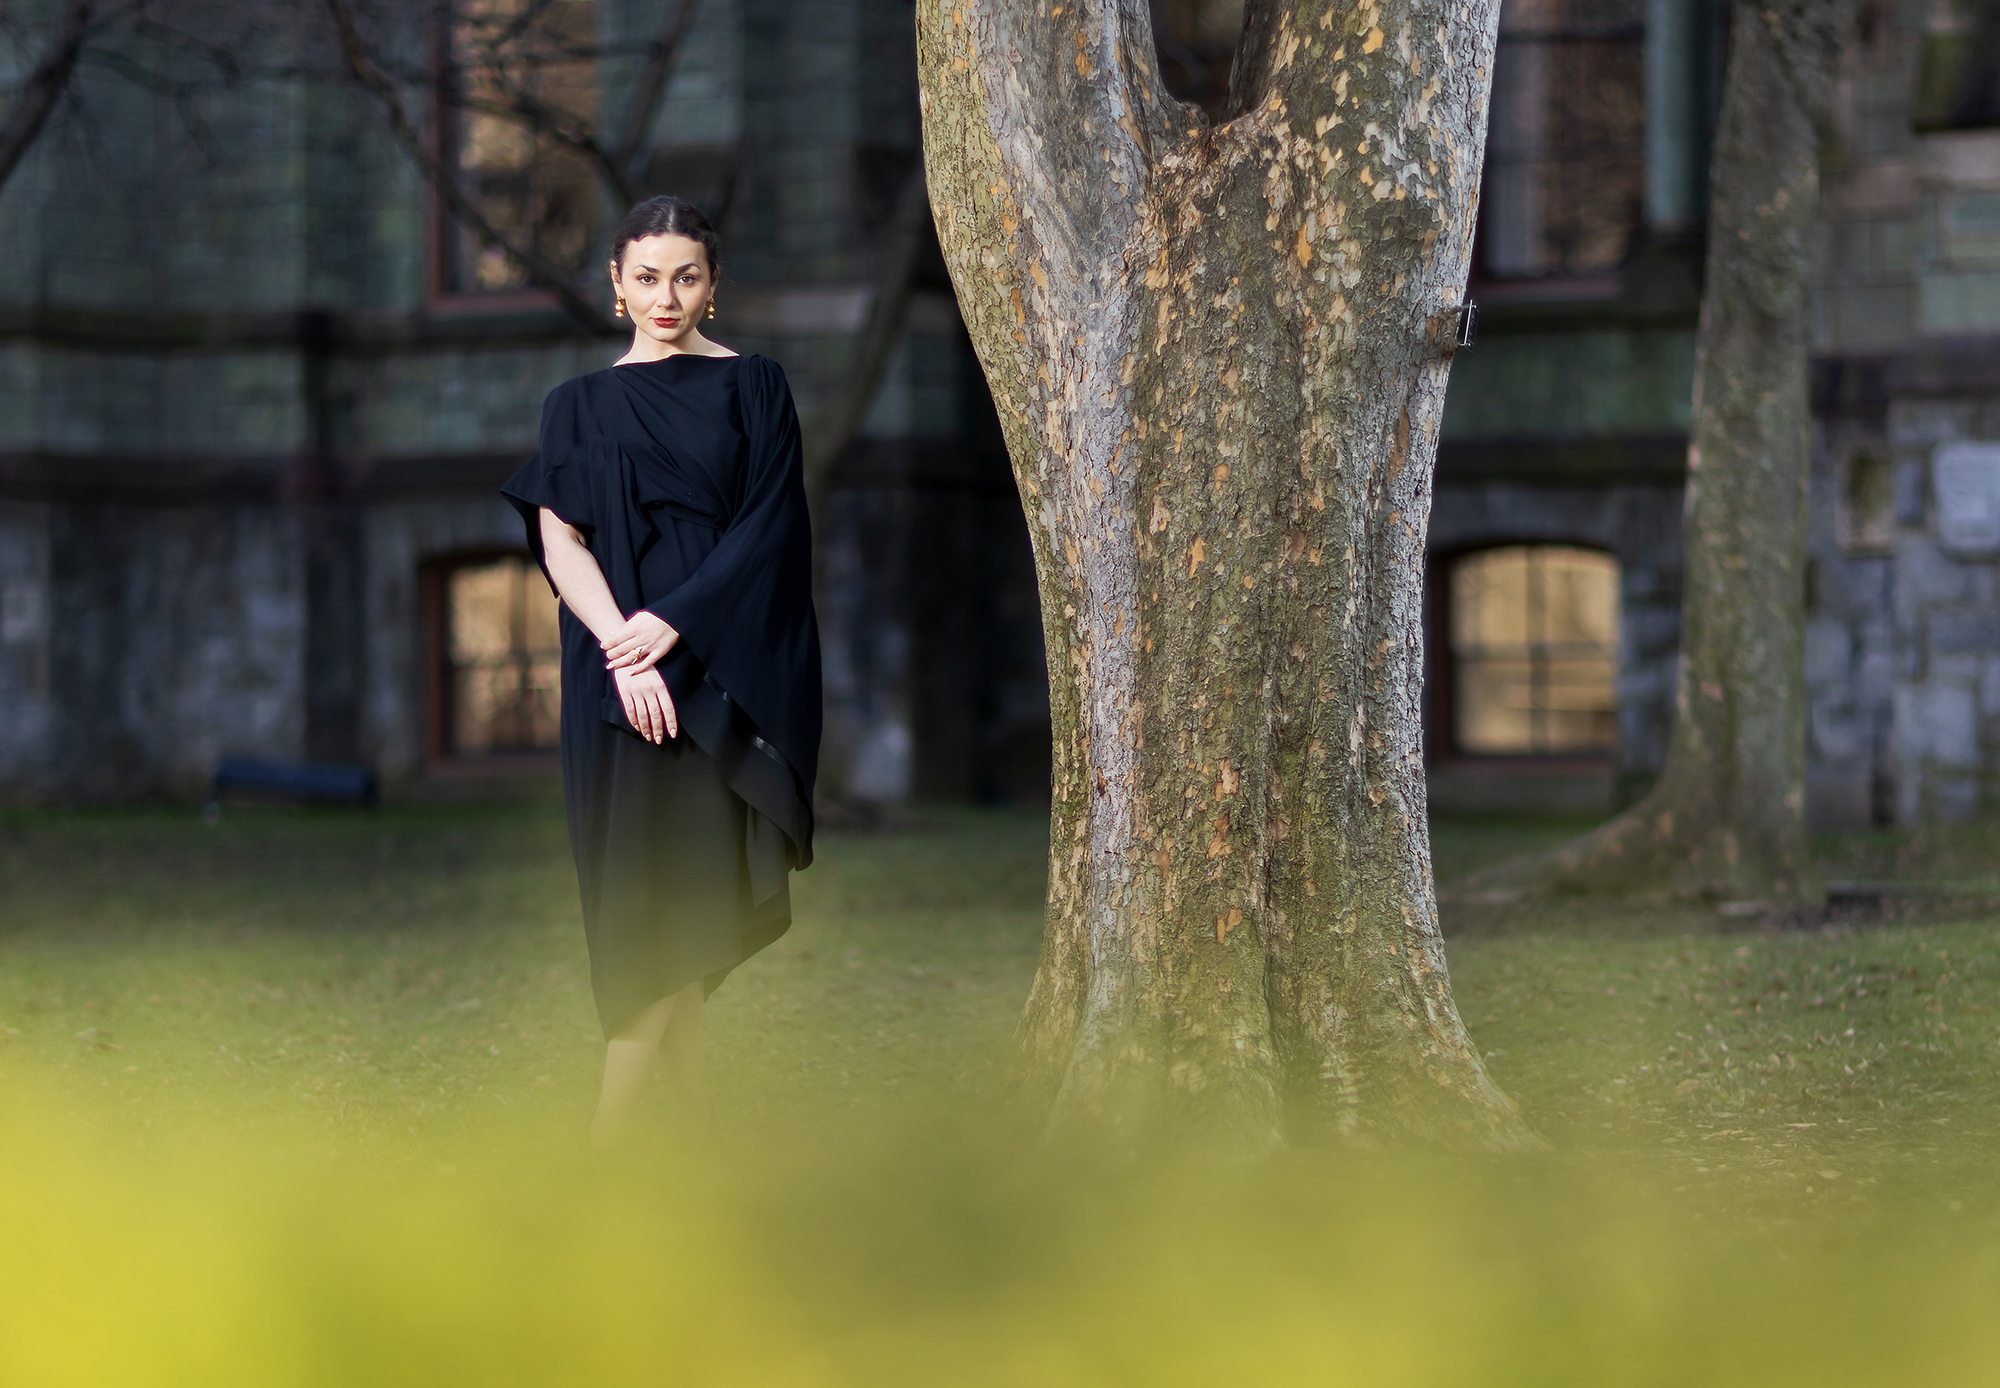 Hannah Kaluher stands near a tree in front of College Hall on Penn campus.